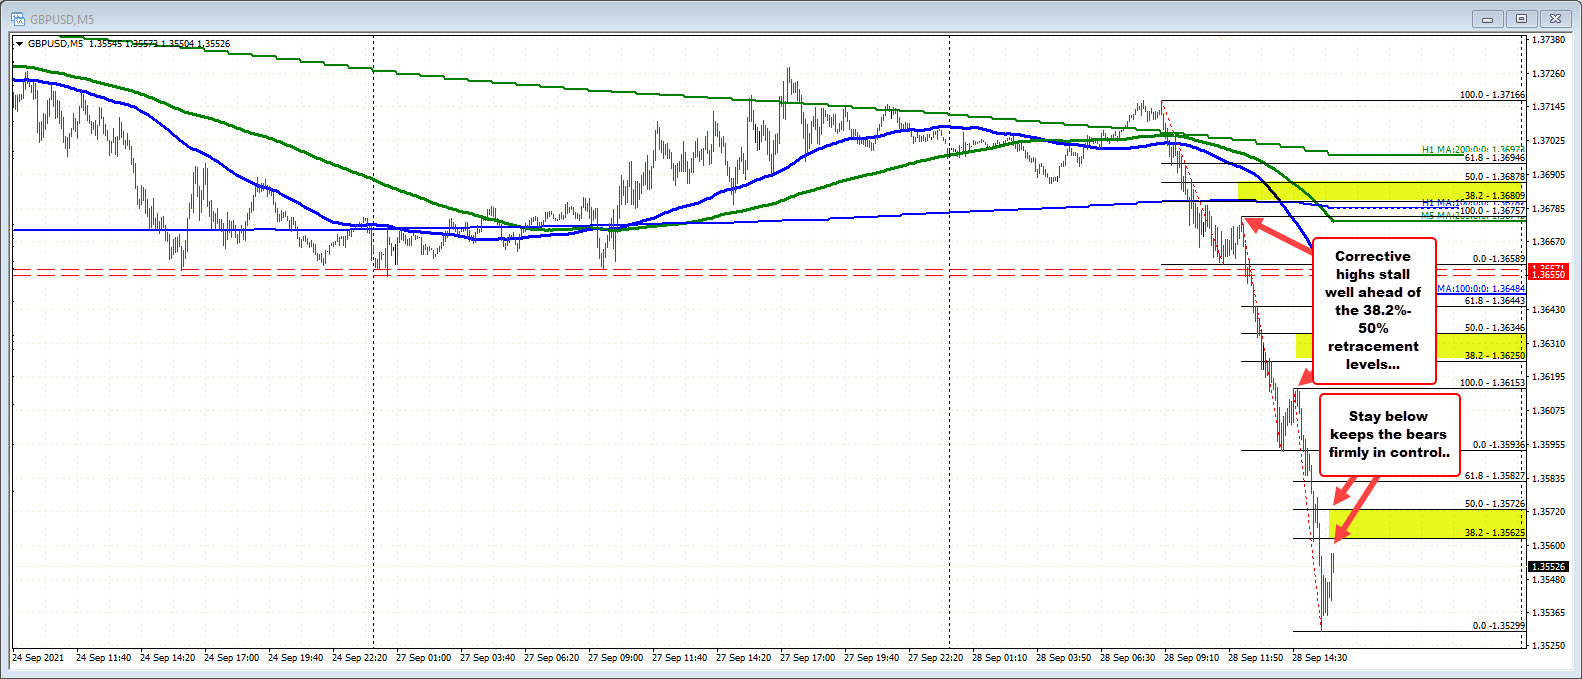 The GBPUSD is trending lower with little in the way of corrections